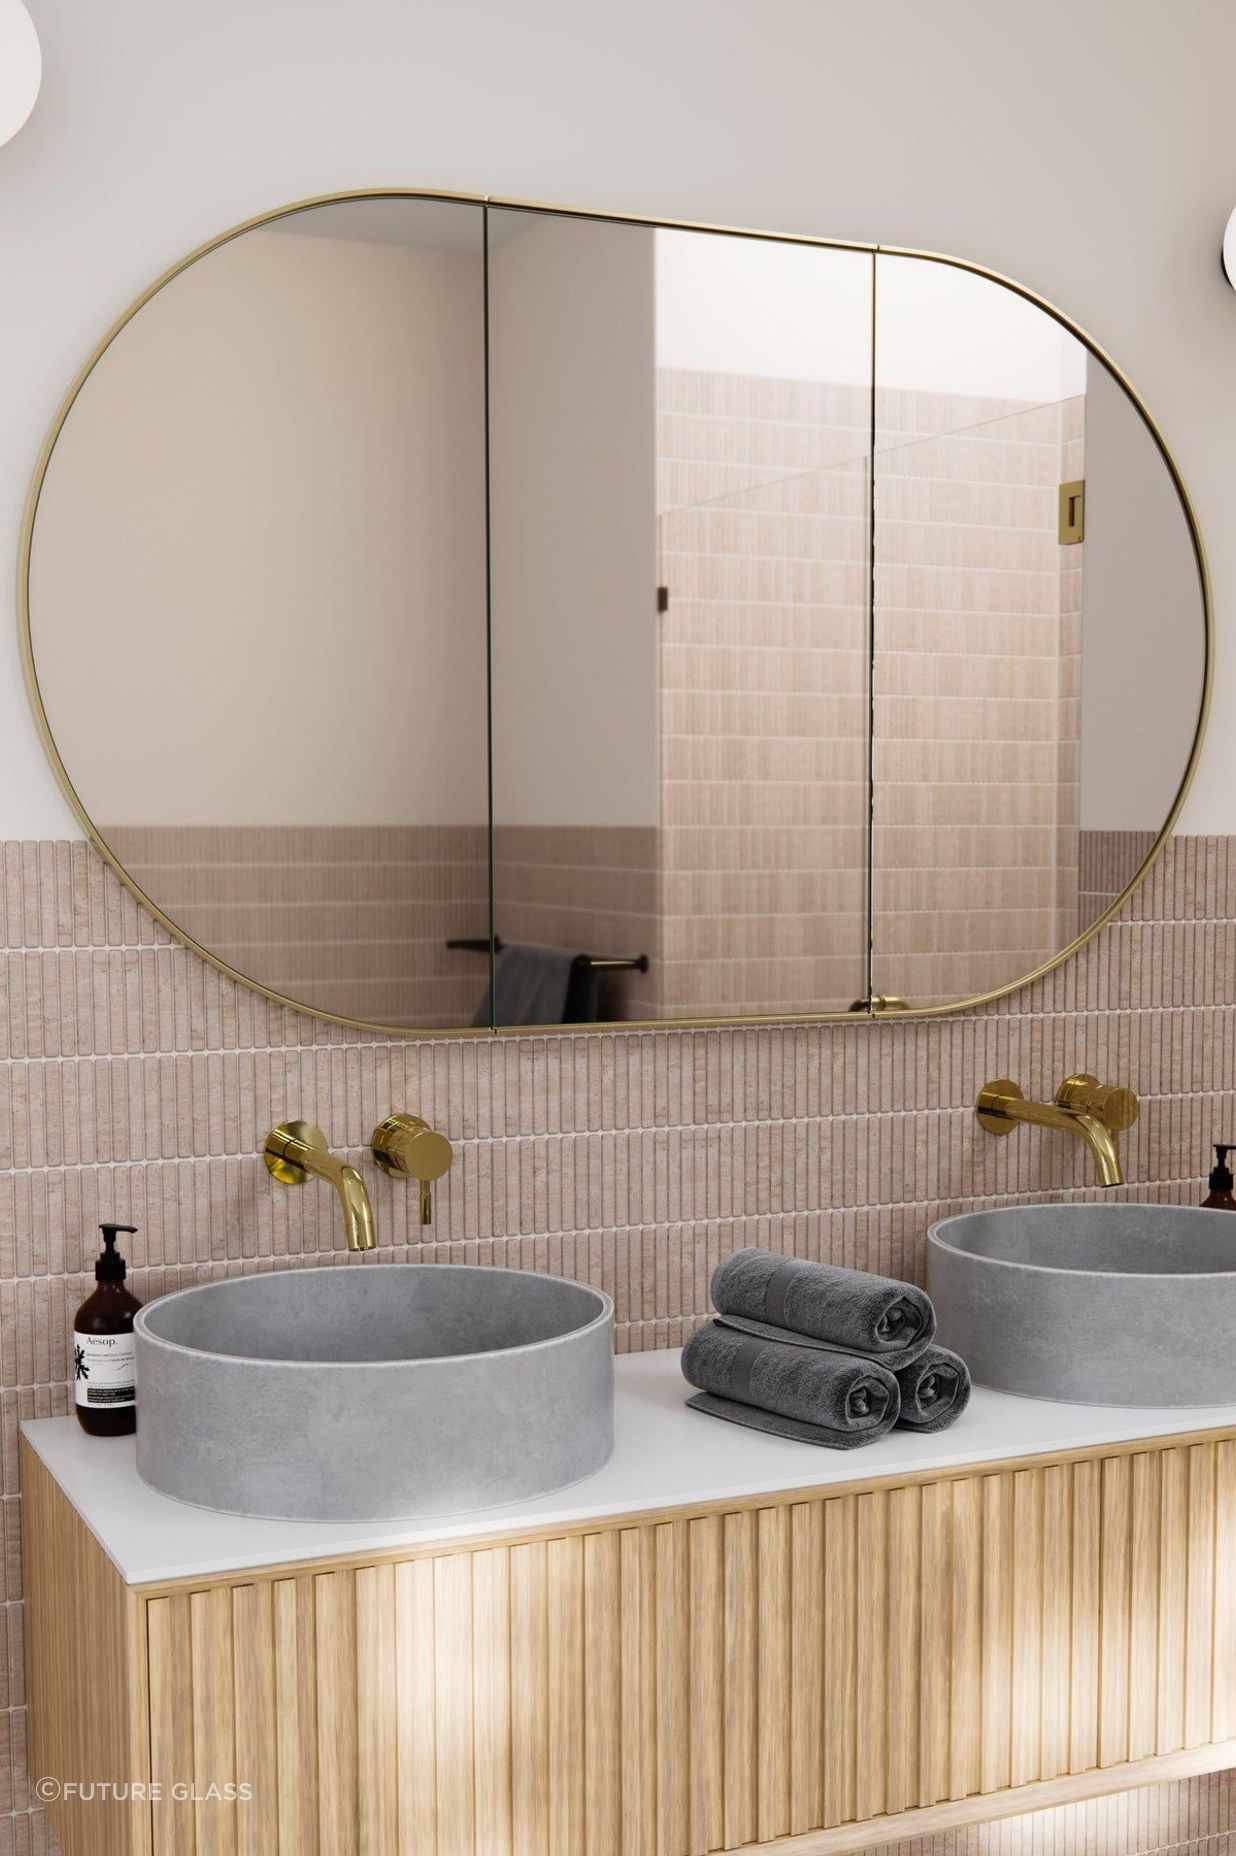 A chic pill-shaped bathroom mirror that adds a touch of quirky charm to your bathroom. Featured product: Pill Mirror Cabinet